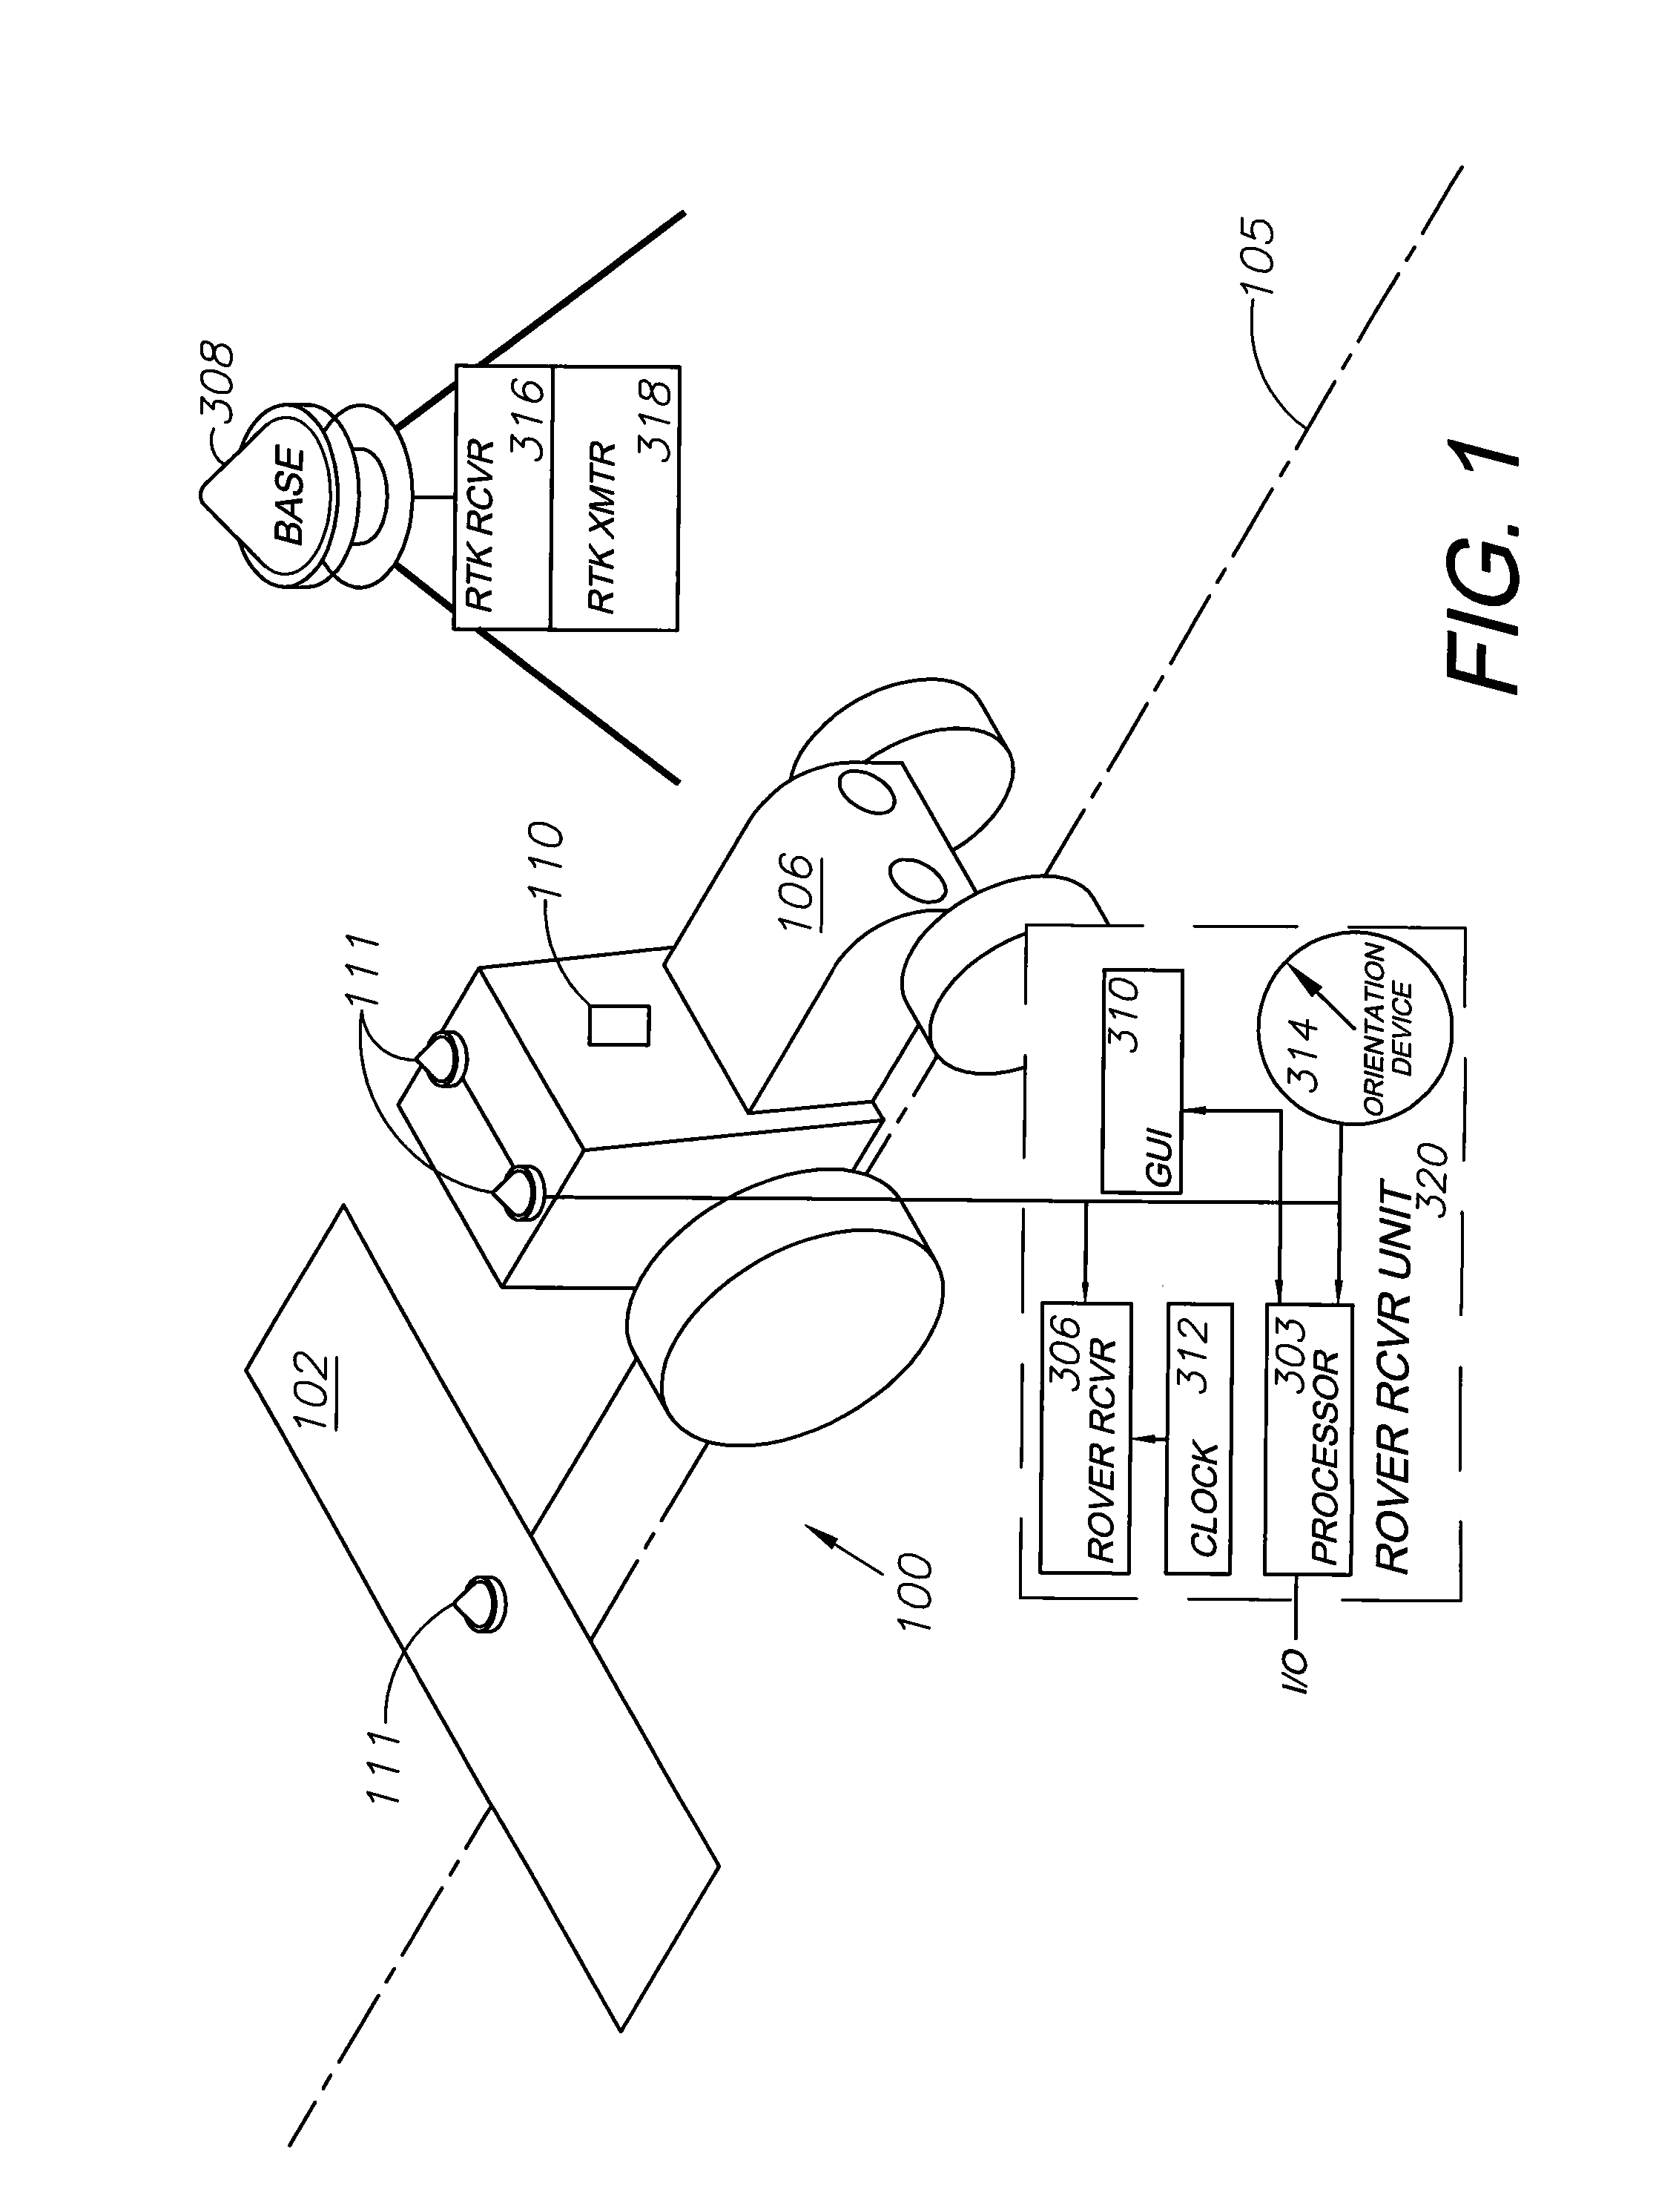 Vehicle assembly control method for collaborative behavior